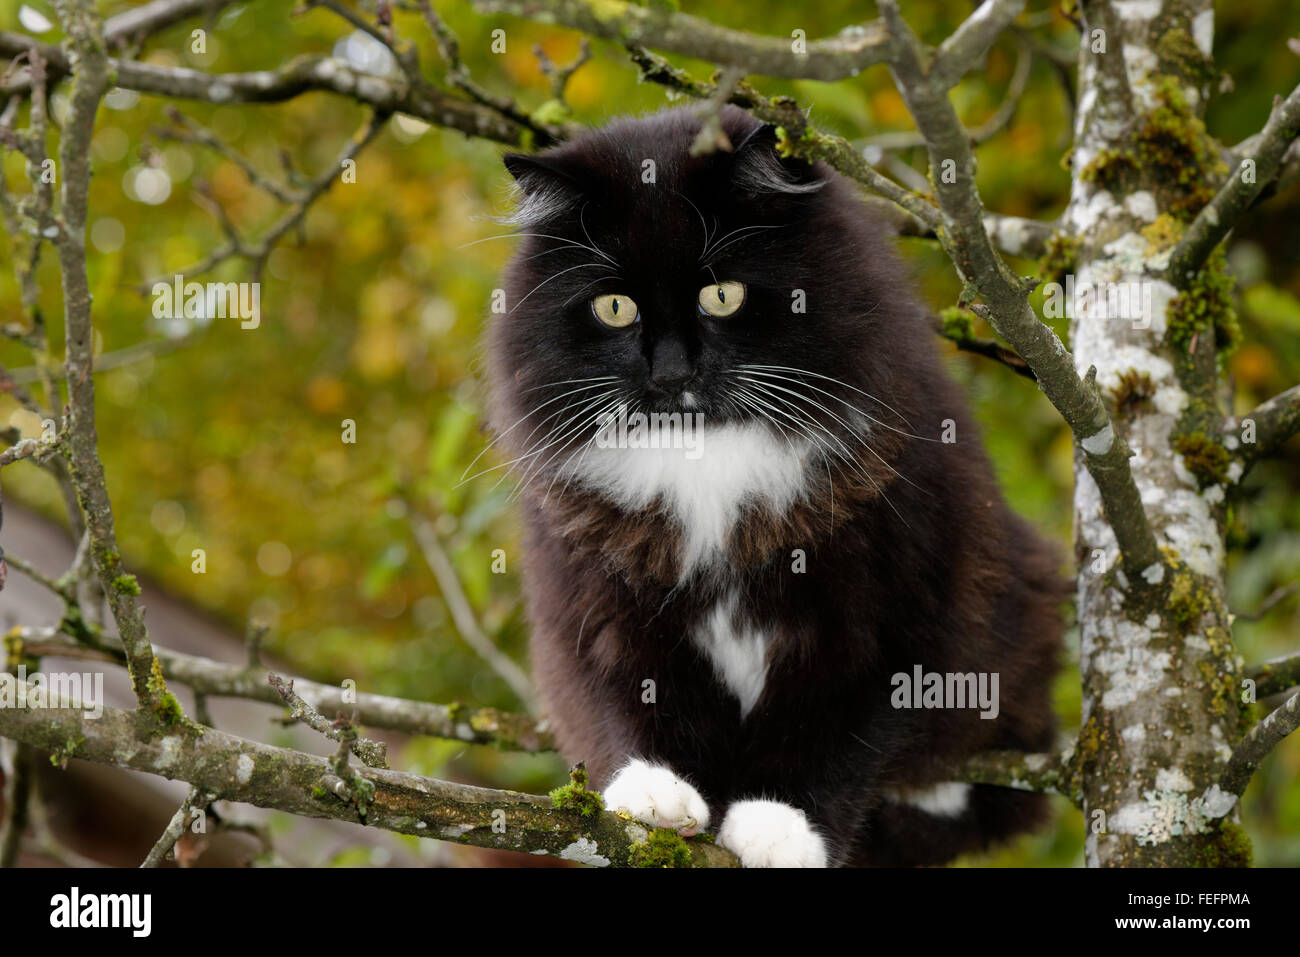 Long-haired black cat in tree, Germany Stock Photo